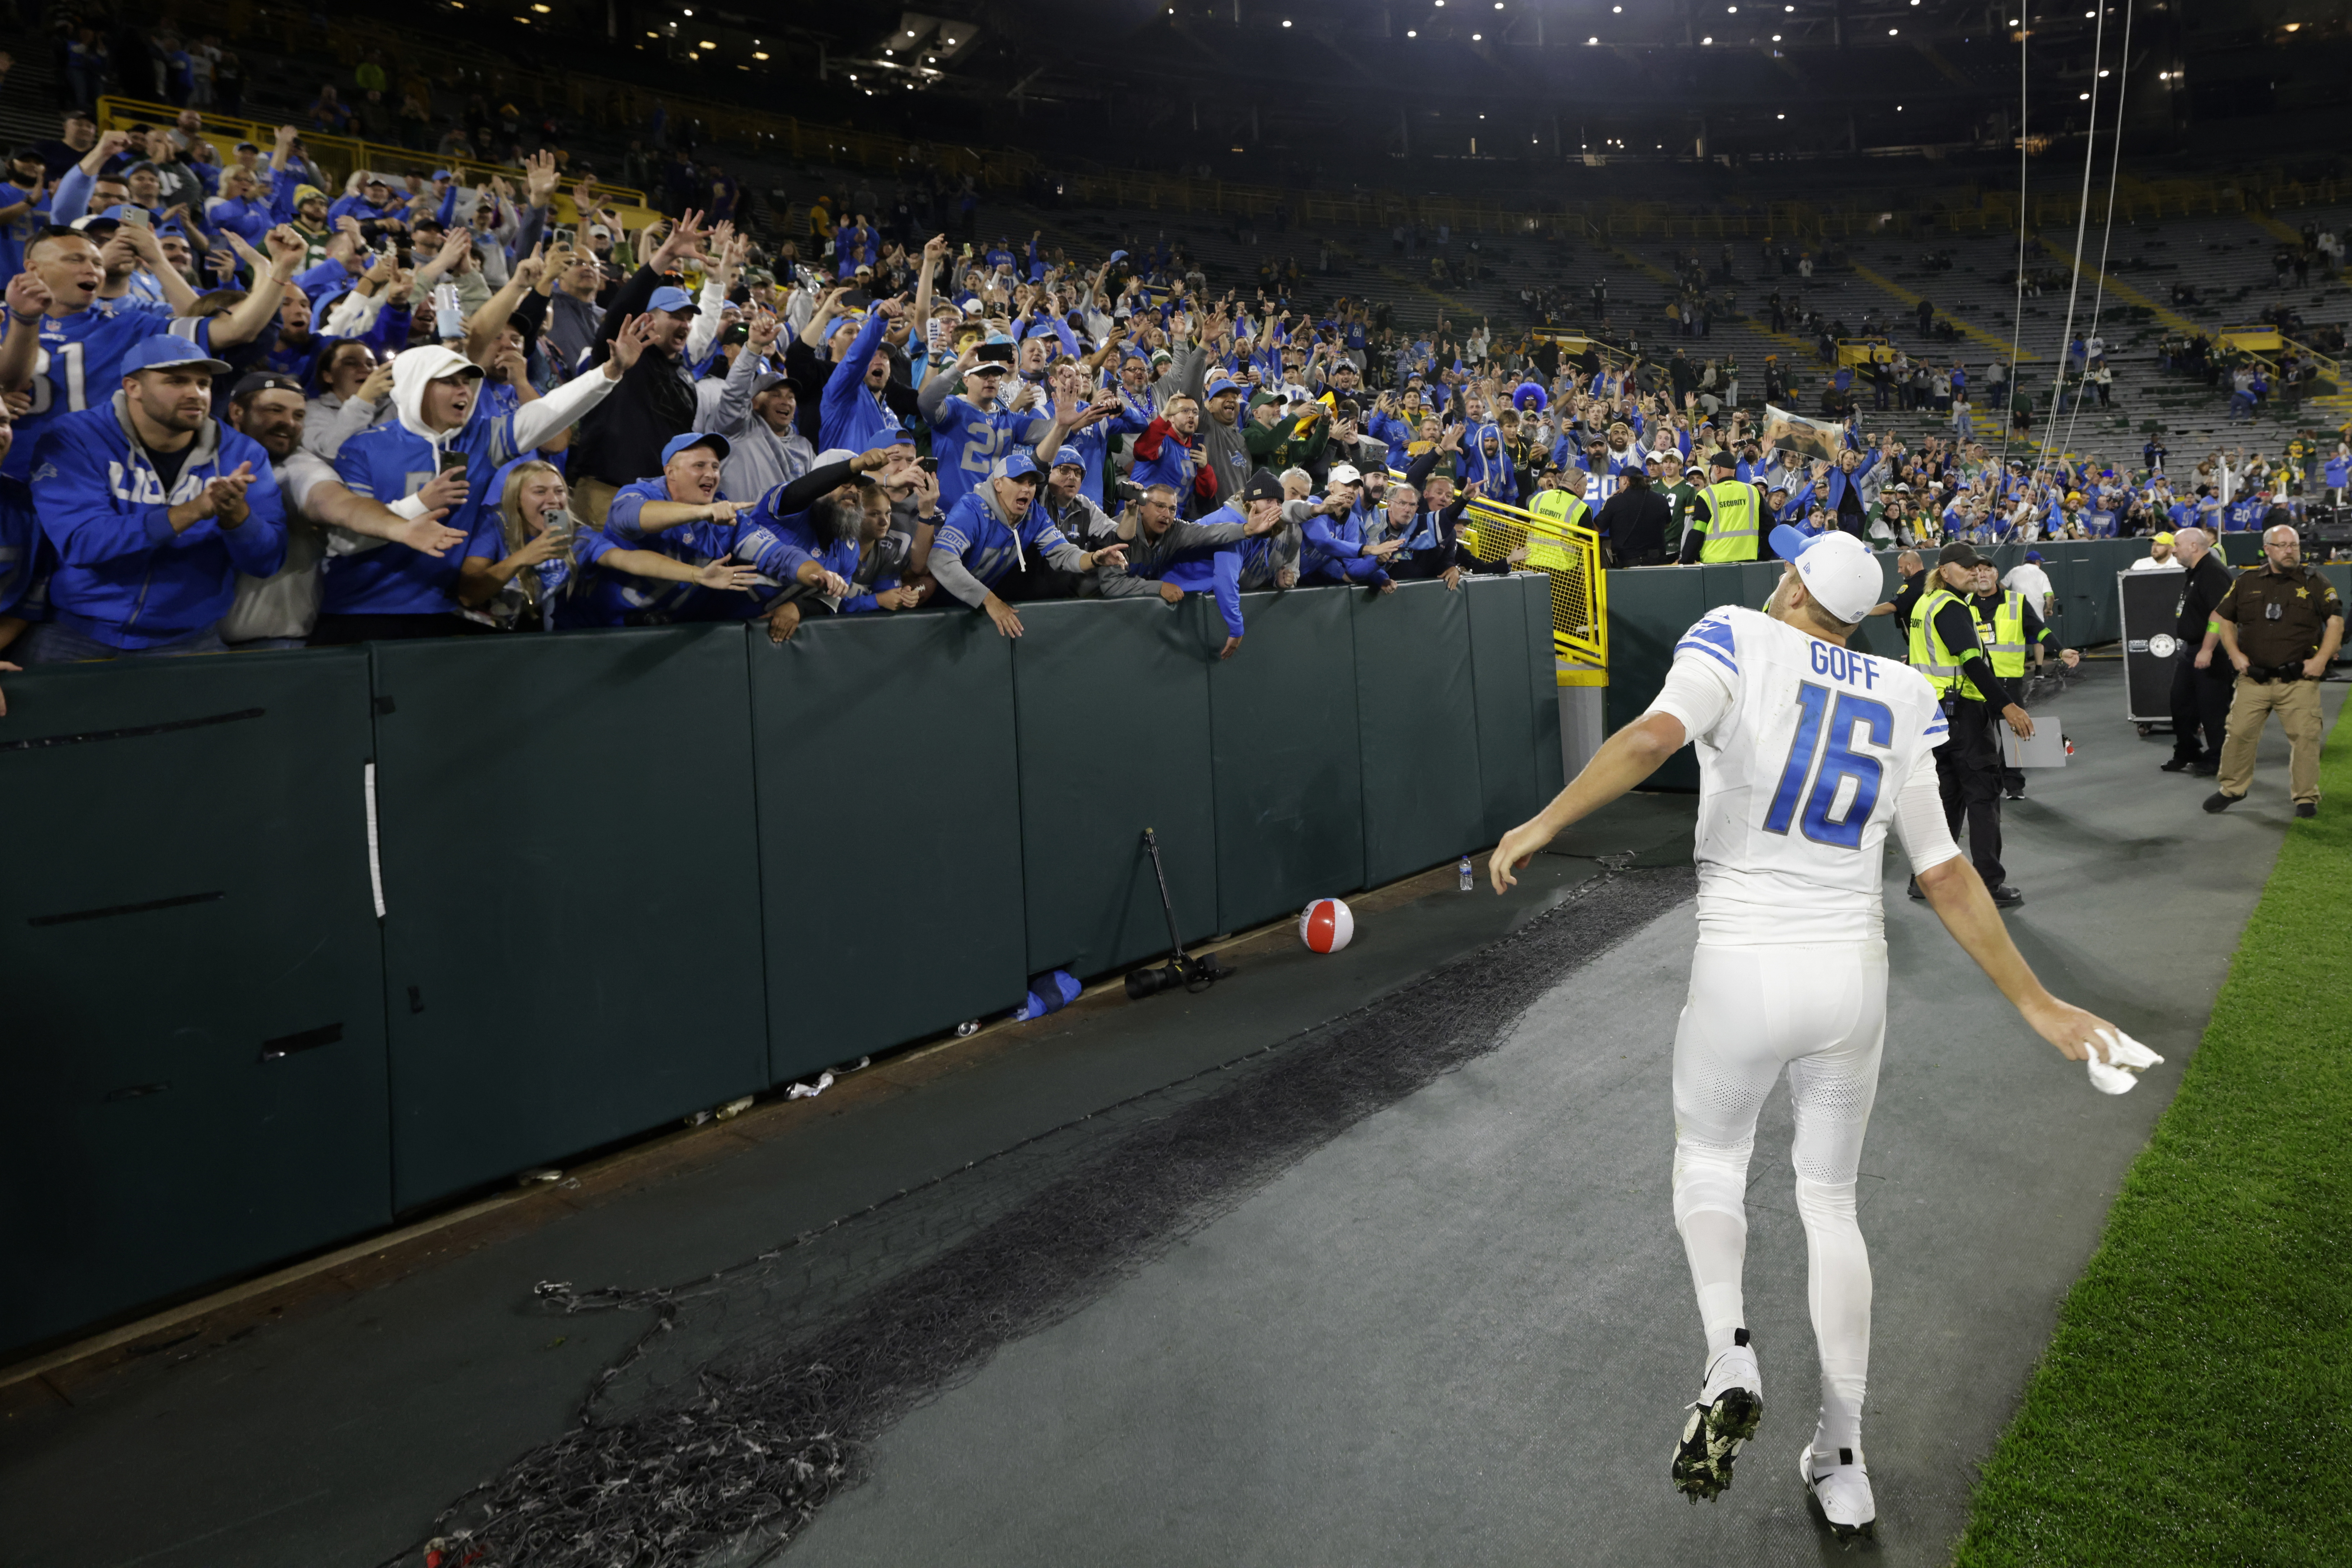 So many Lions fans crashed Lambeau Field, the Packers issued a